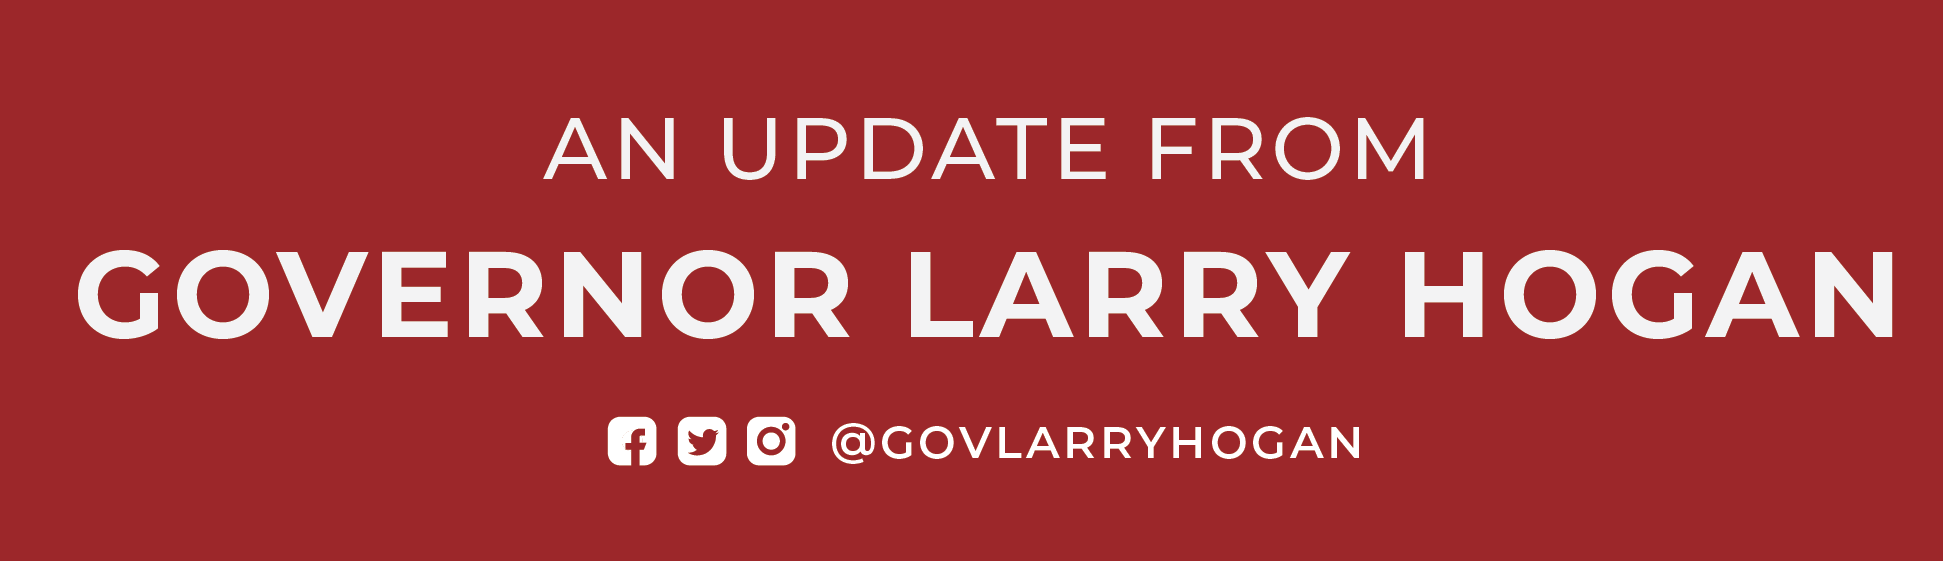 An Update from Governor Larry Hogan 